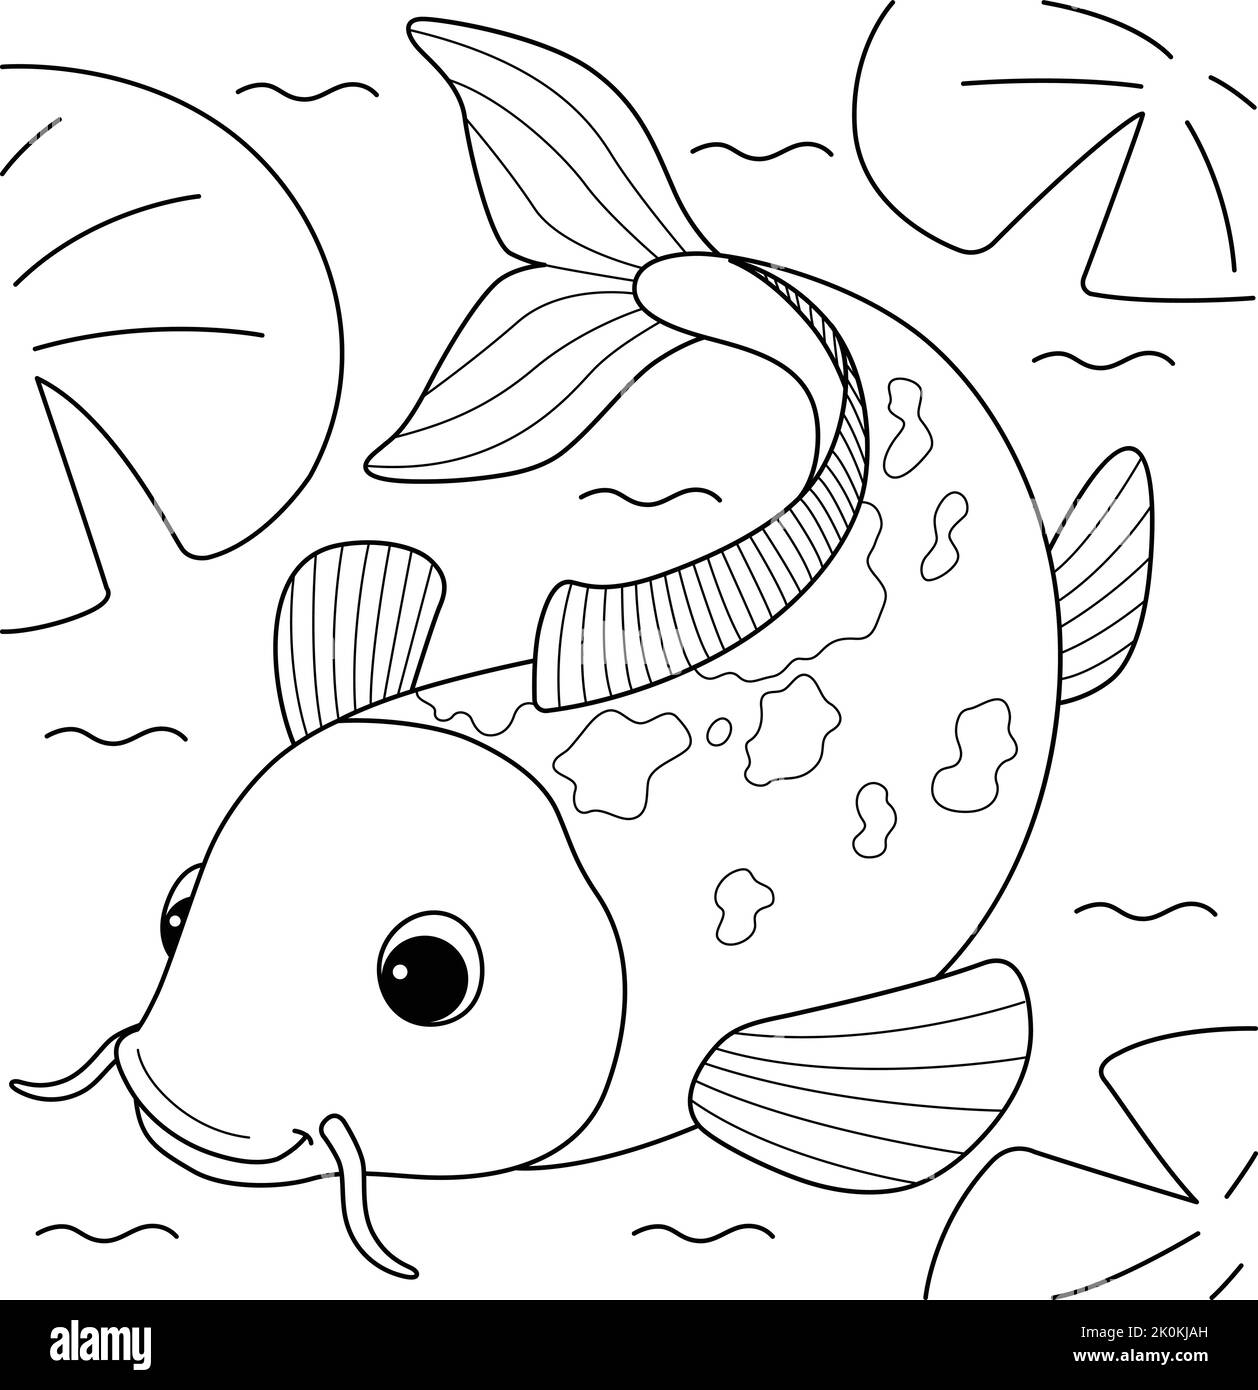 Fish coloring page drawing for kids Cut Out Stock Images